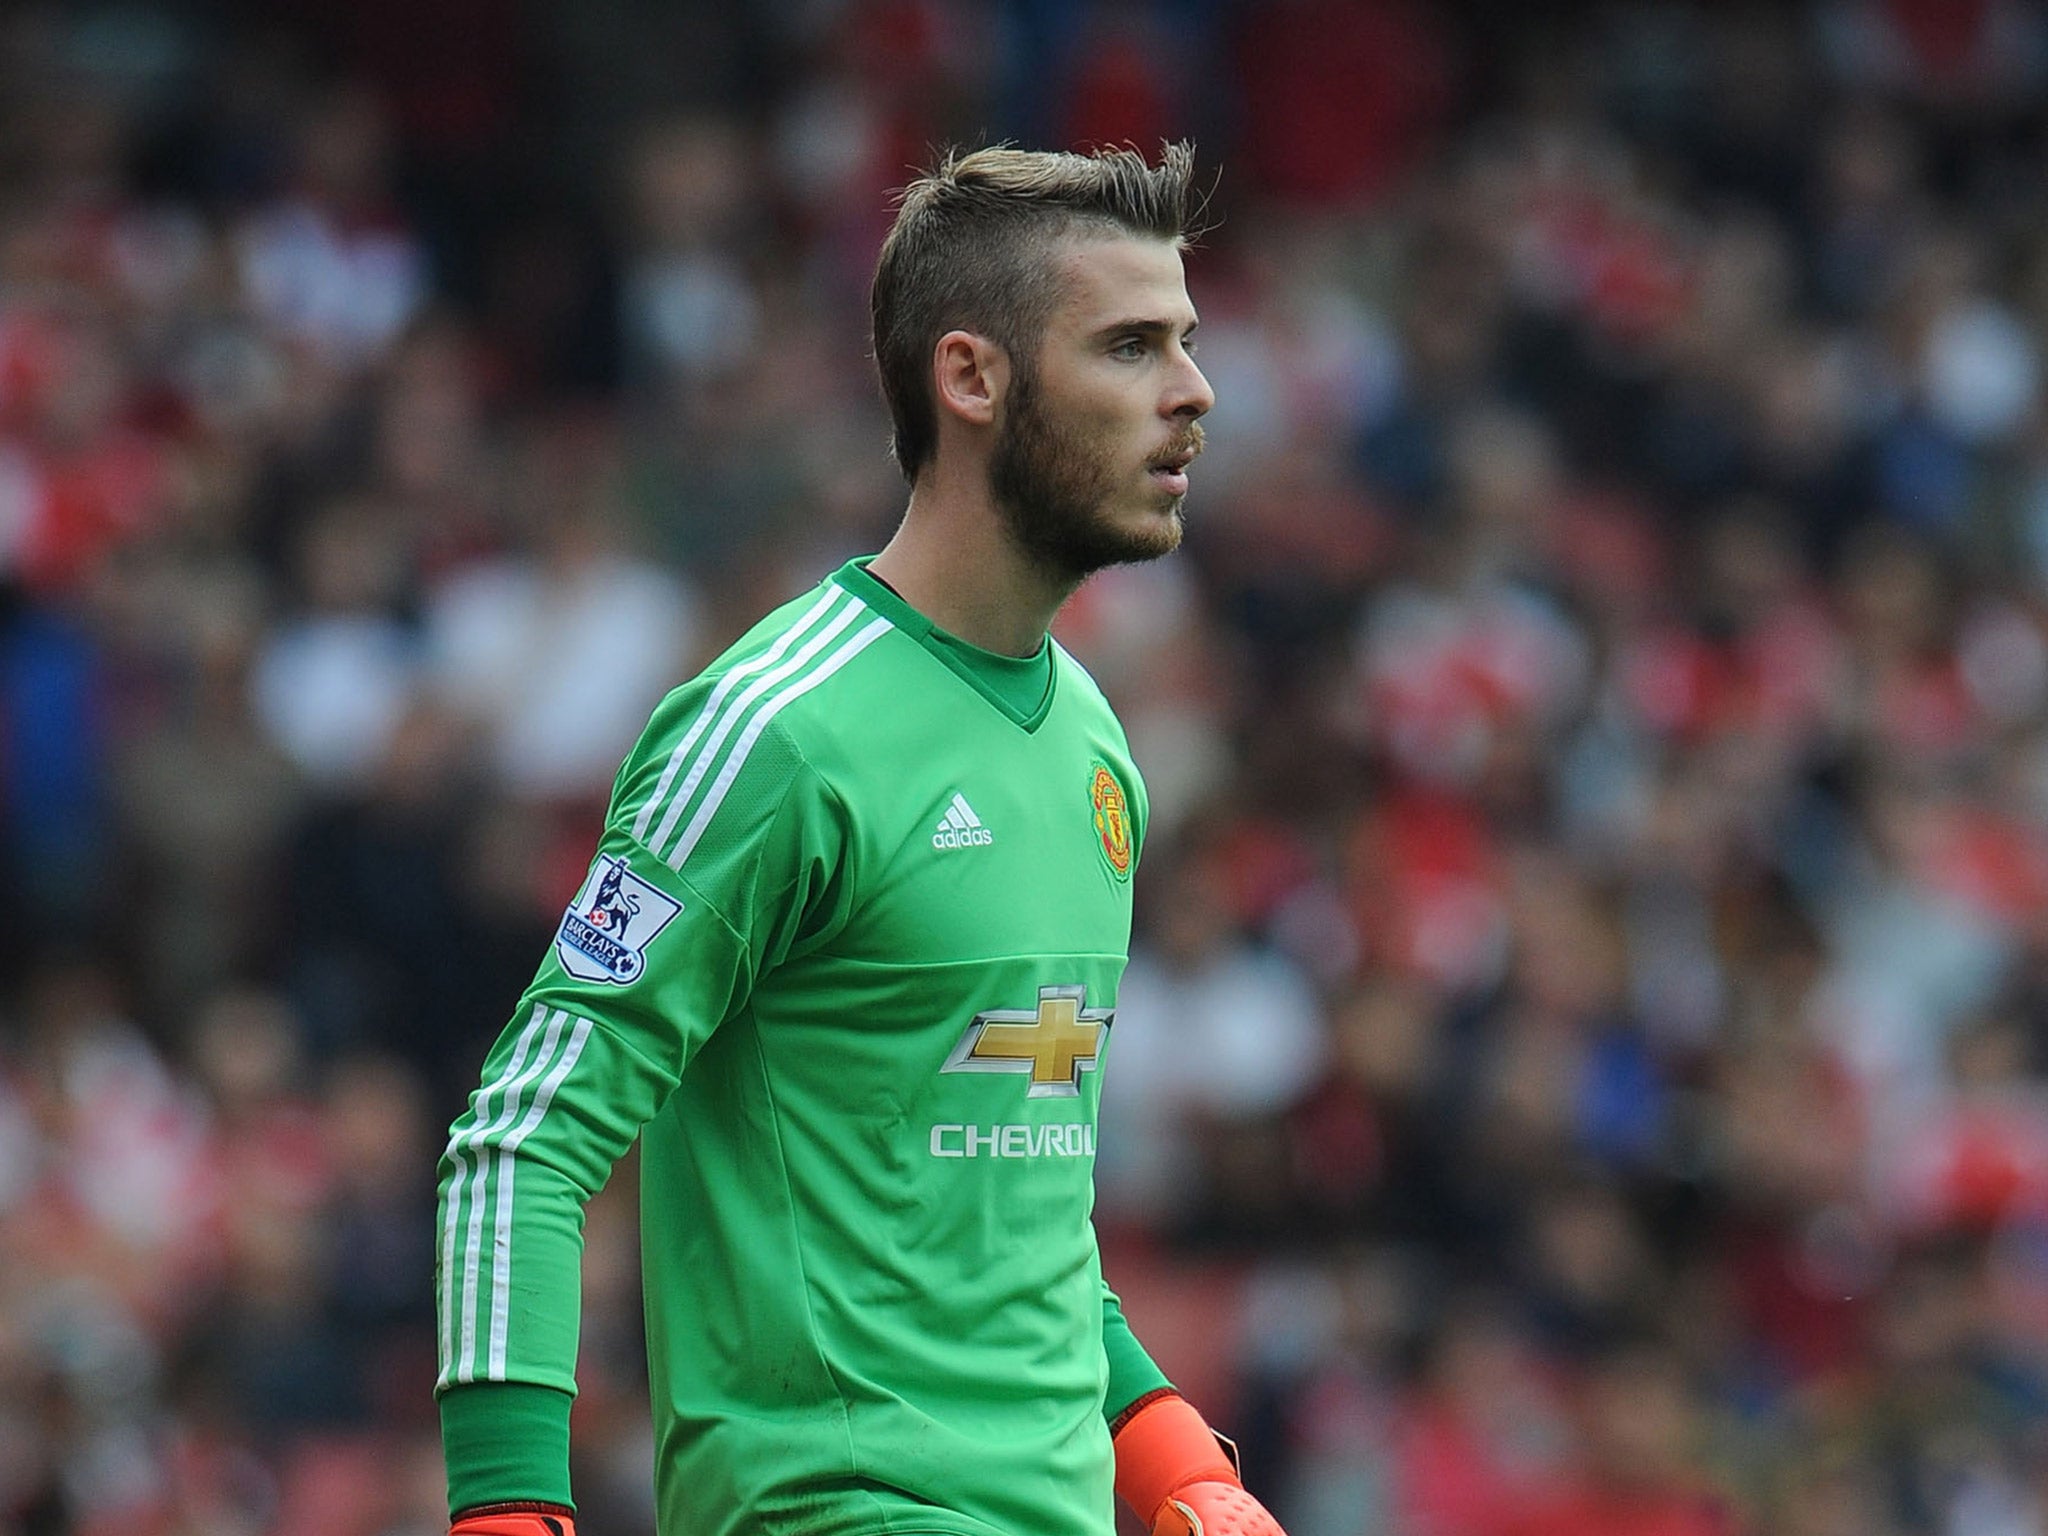 De Gea's new deal at Old Trafford is due to keep him with Manchester United until 2019